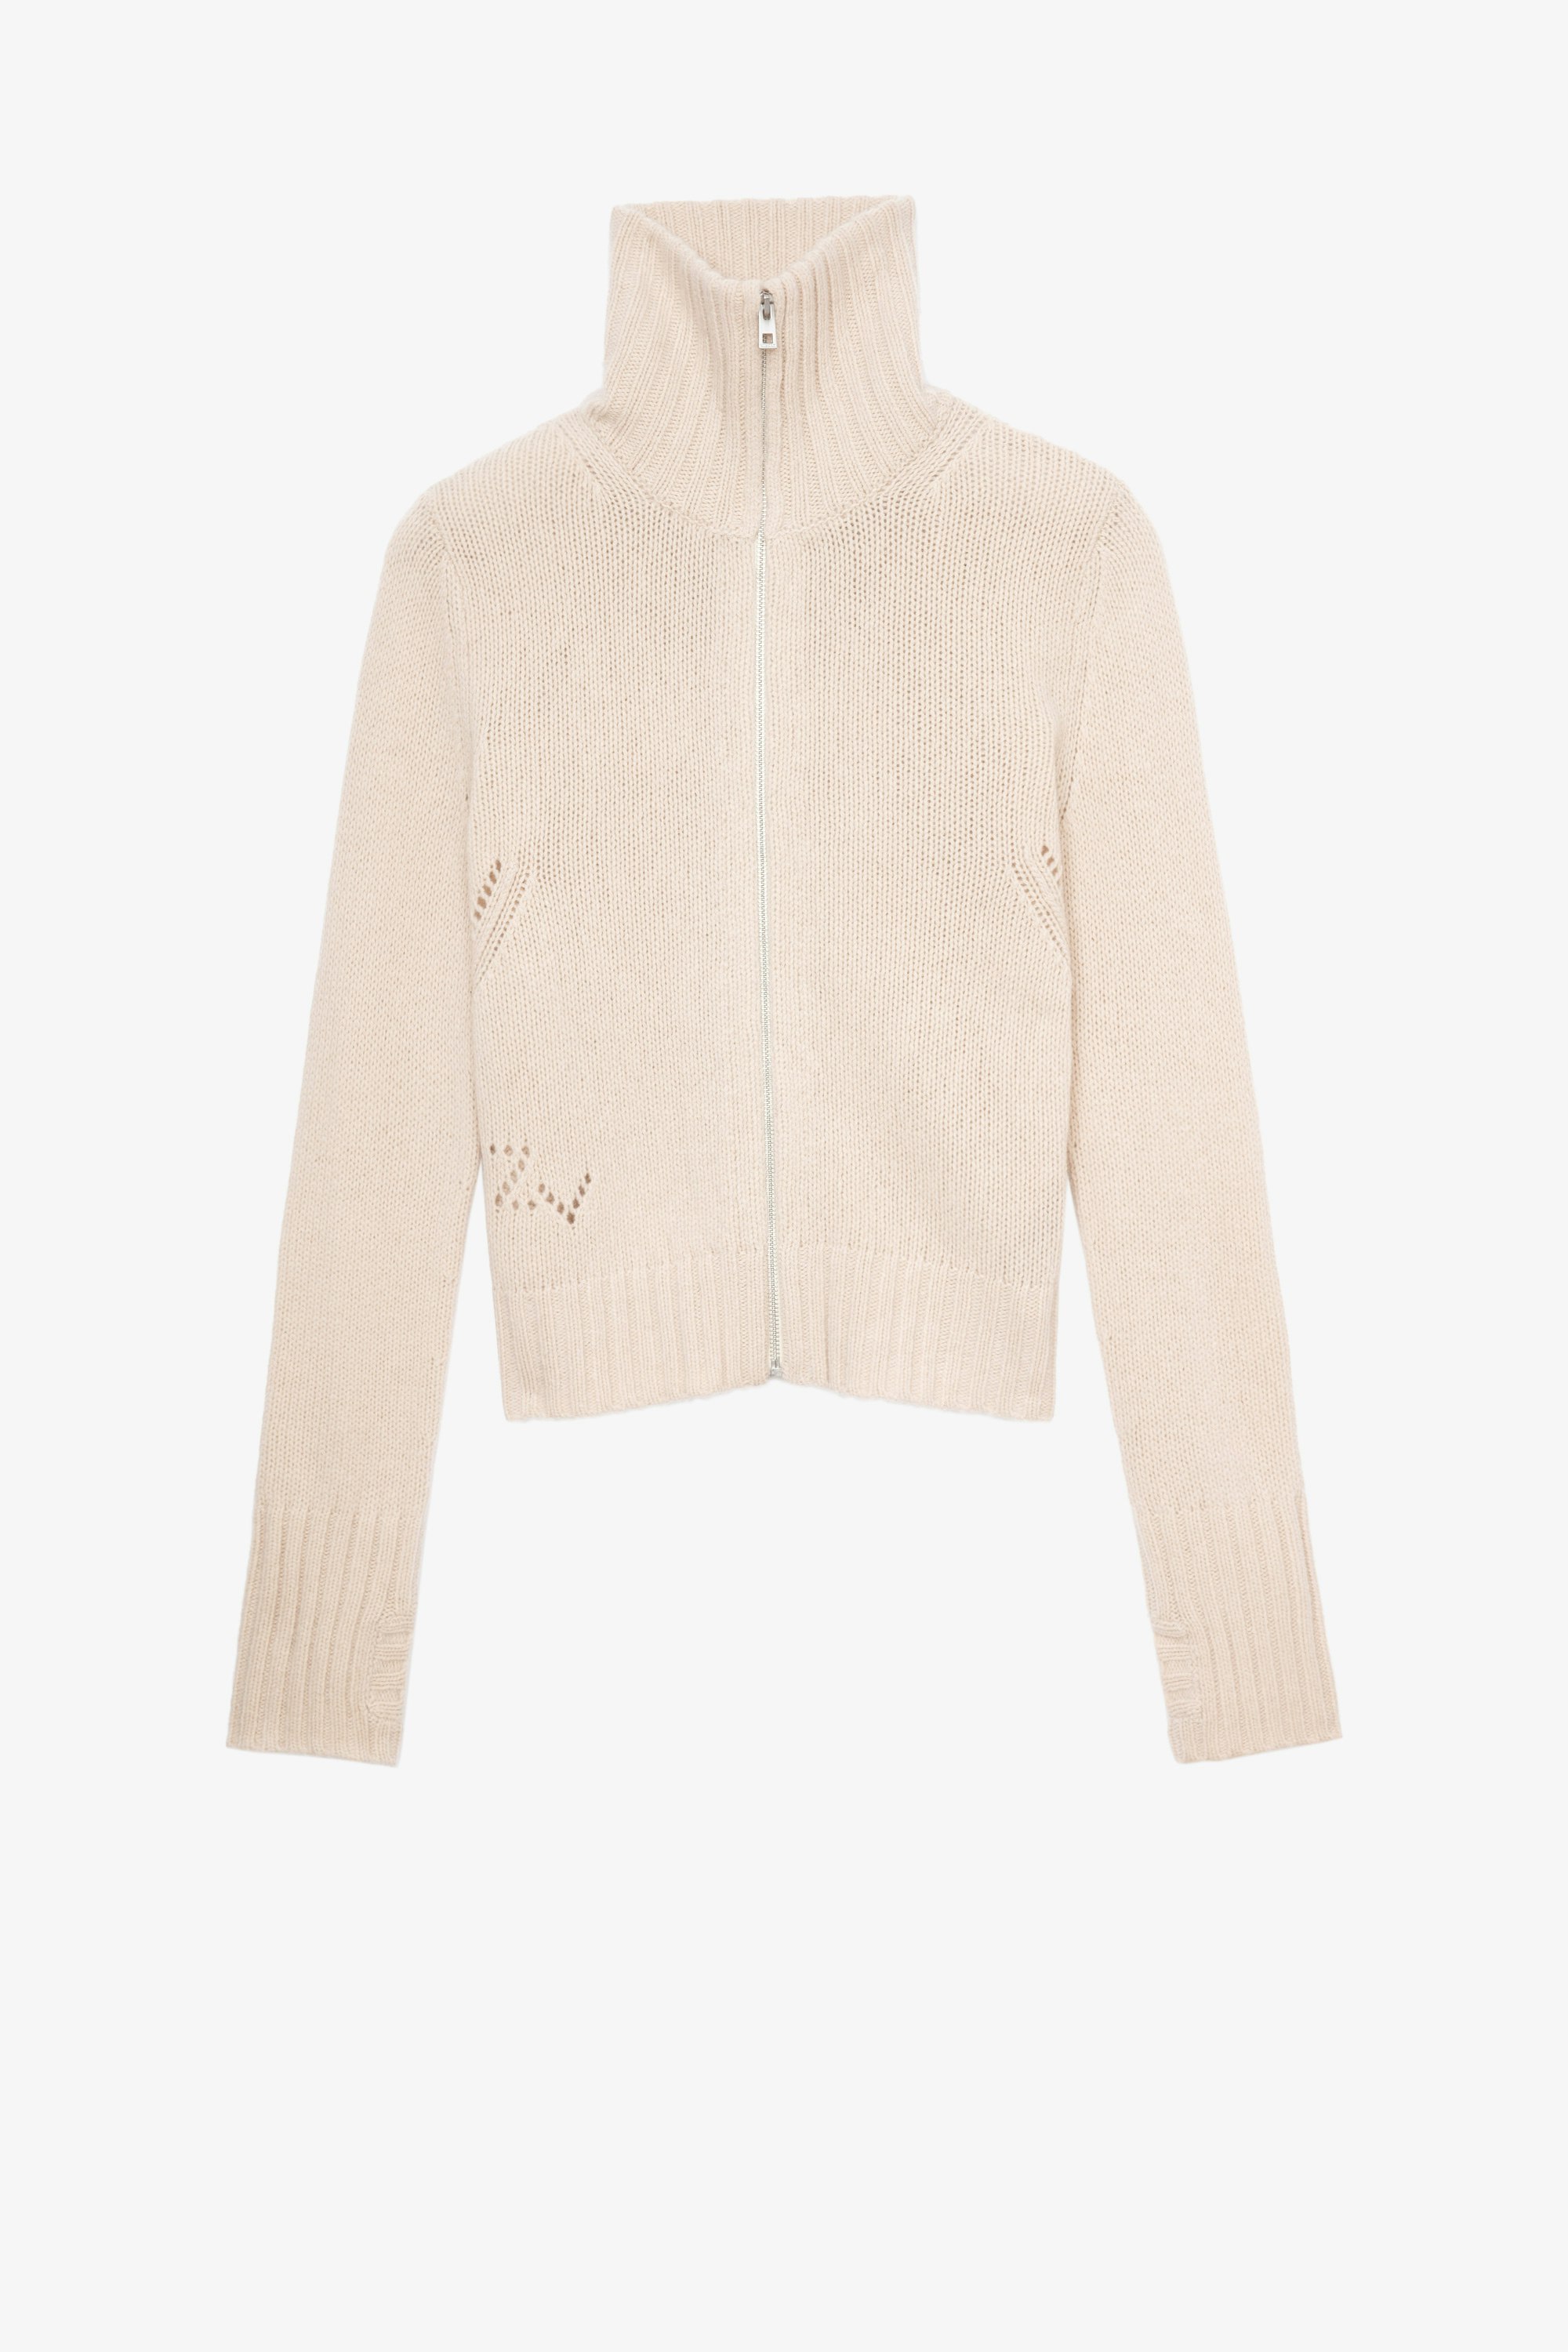 Gilda Lead Cardigan Women’s beige knit zip-up cardigan with stand collar and flocking on the back